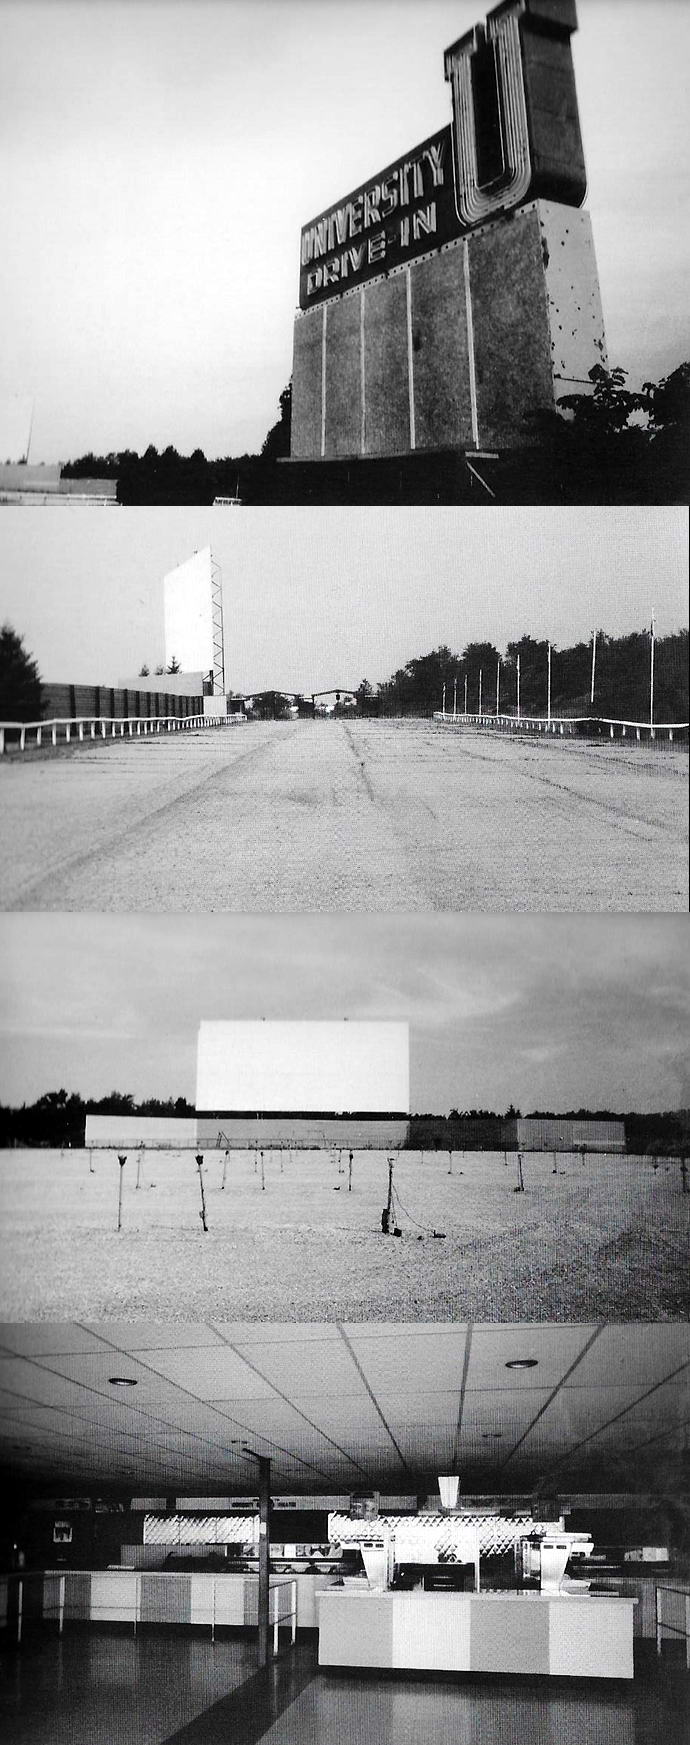 University Drive-In Theatre - SERIES OF PHOTOS FROM HARRY SKRDLA